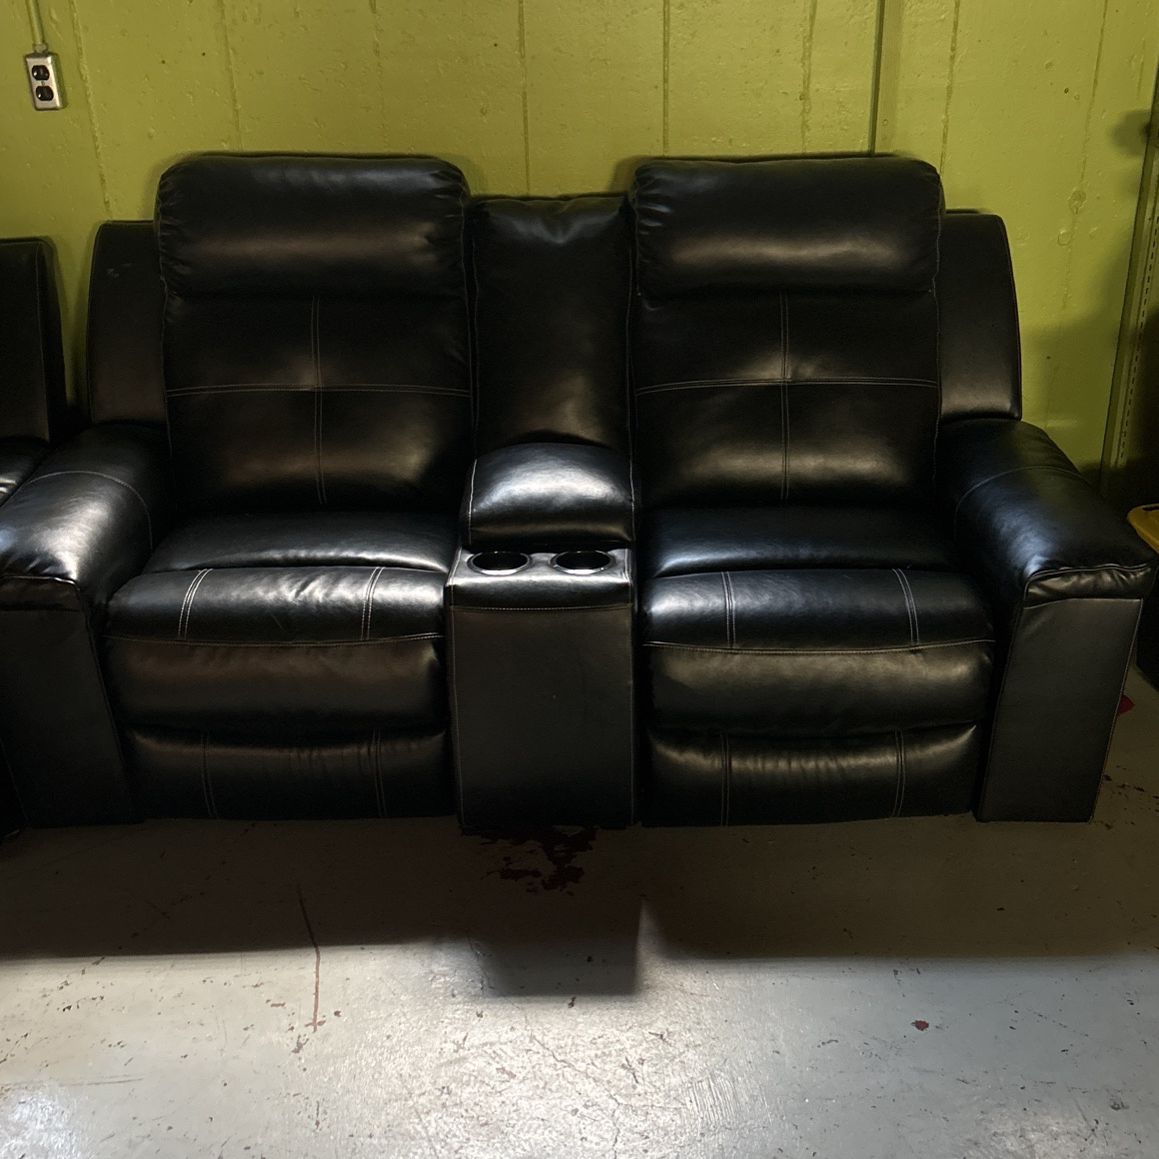 Like new couches. 